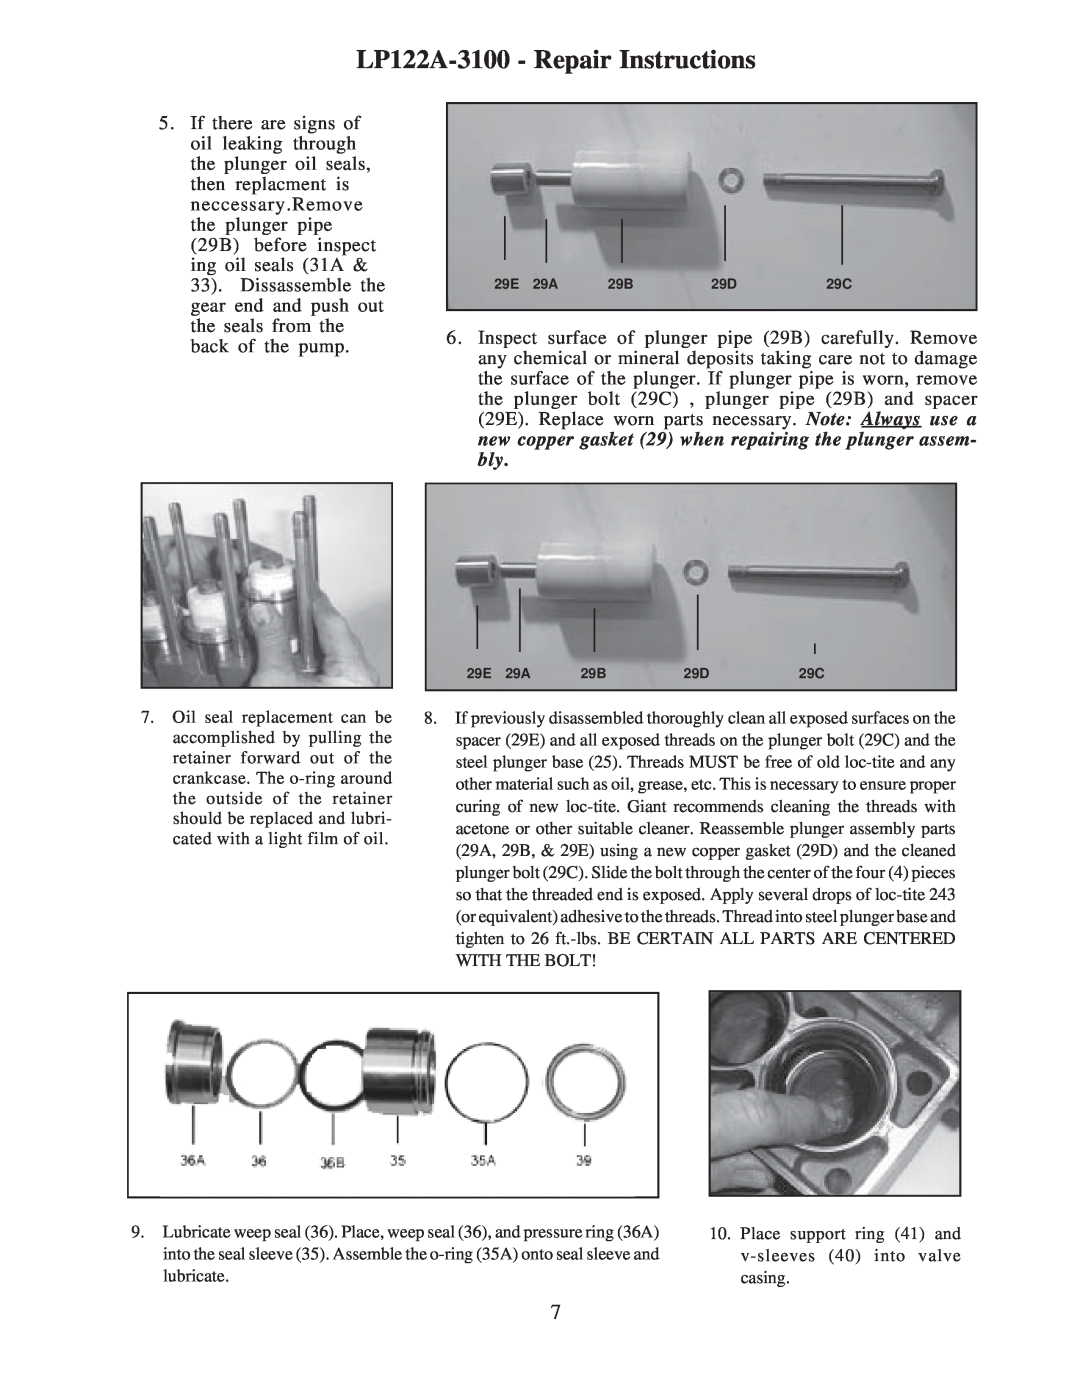 Giant LP122A-3100 - Repair Instructions, Lubricate weep seal 36. Place, weep seal 36, and pressure ring 36A 